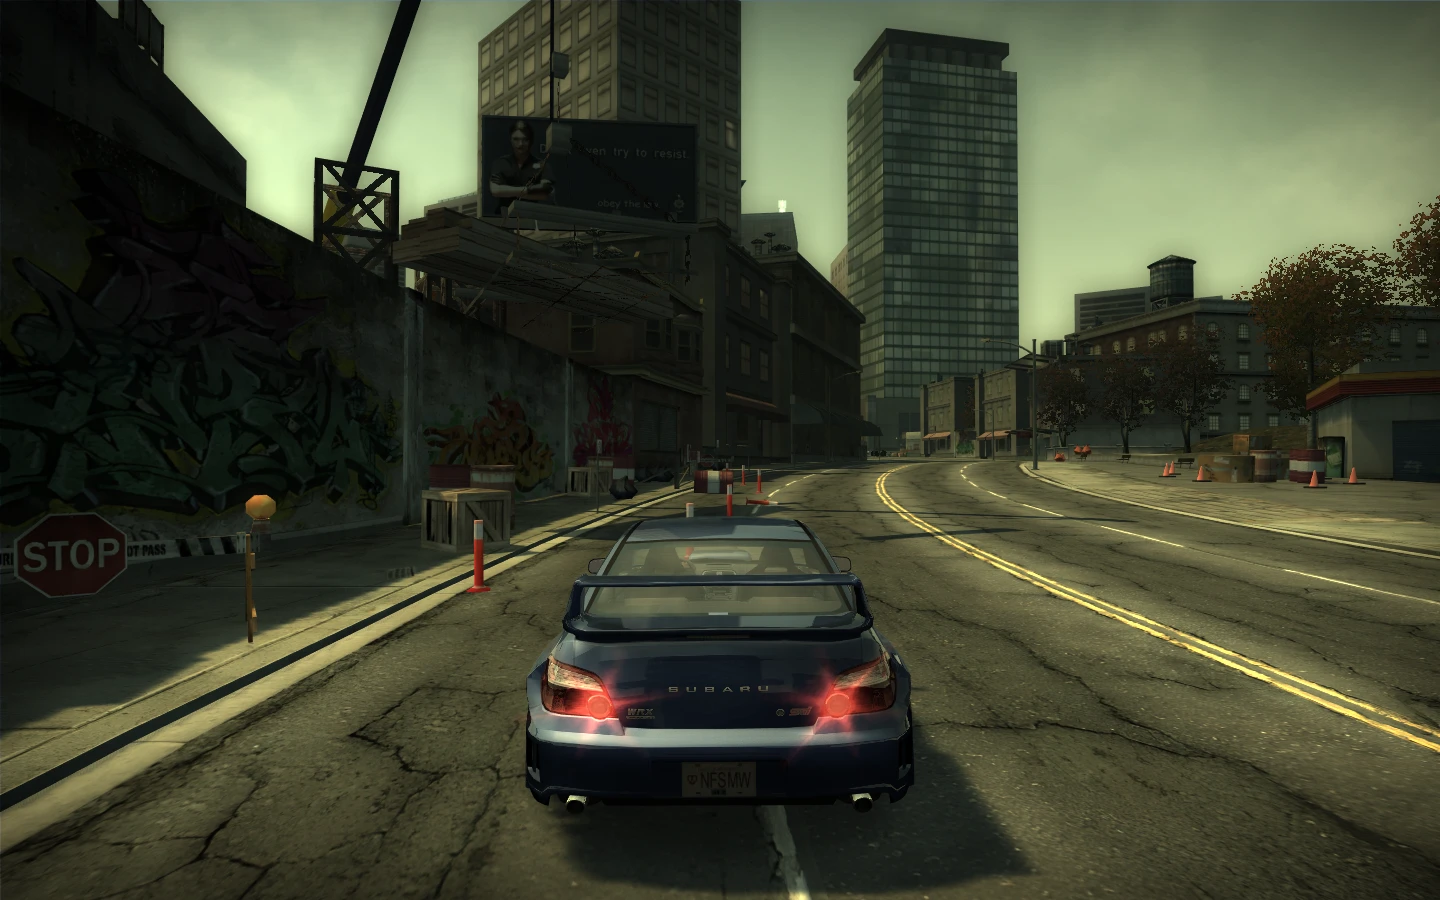 NFS MW RETEXTURE 4X upscale at Need for Speed: Most Wanted (2005) Nexus ...